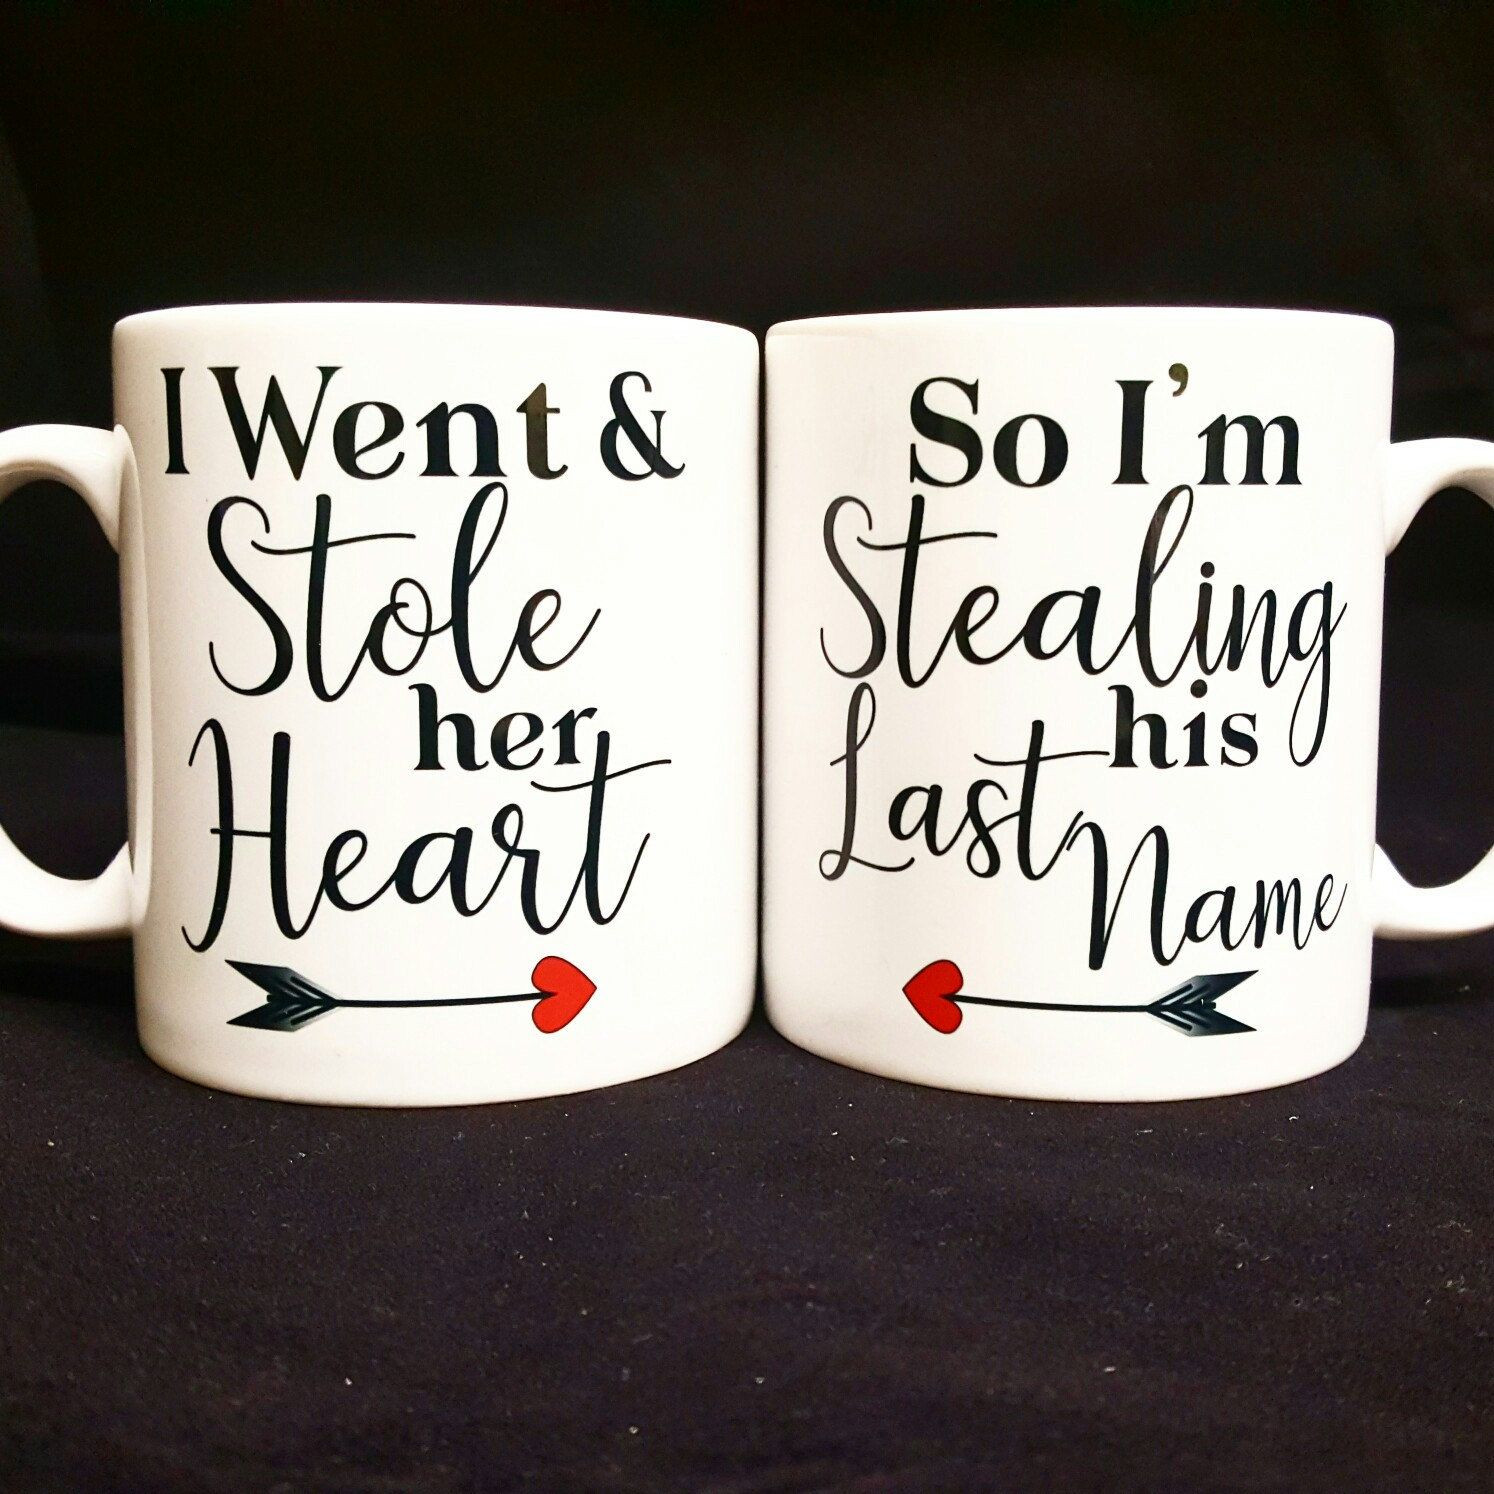 Gift Ideas For Newly Engaged Couple
 Stole Her Heart Stealing His Name Newly Engaged Couple